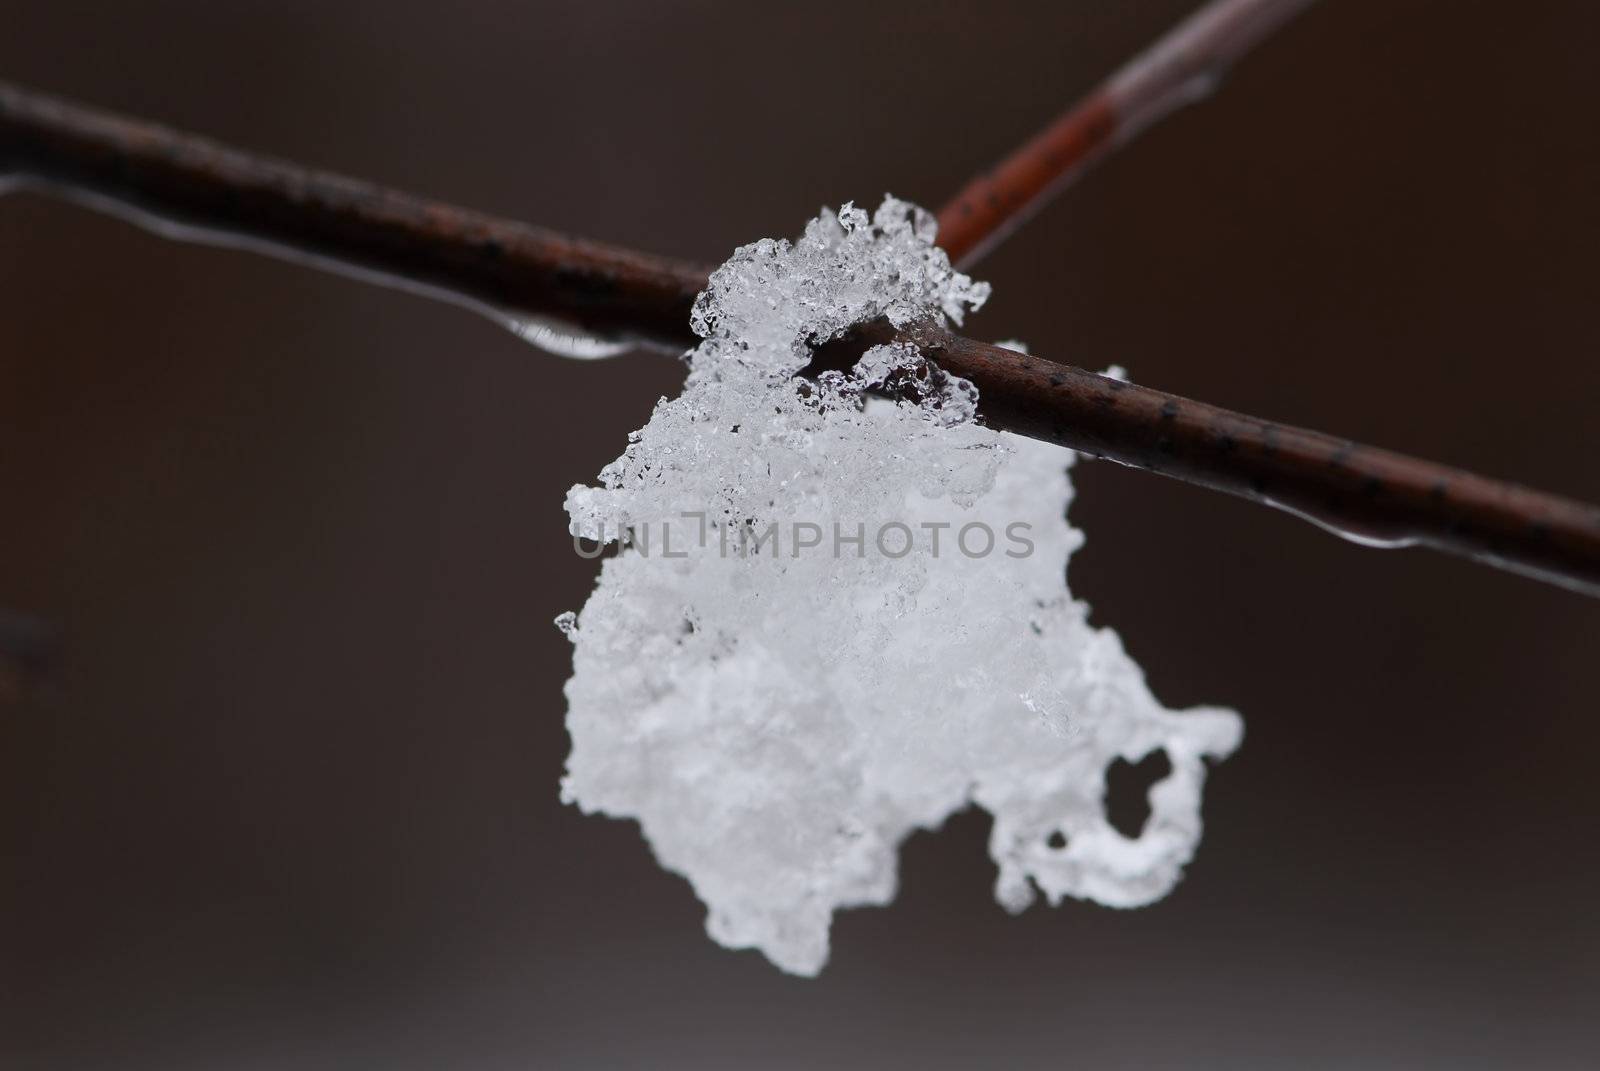 Melting snow hanging on a tree branch in winter